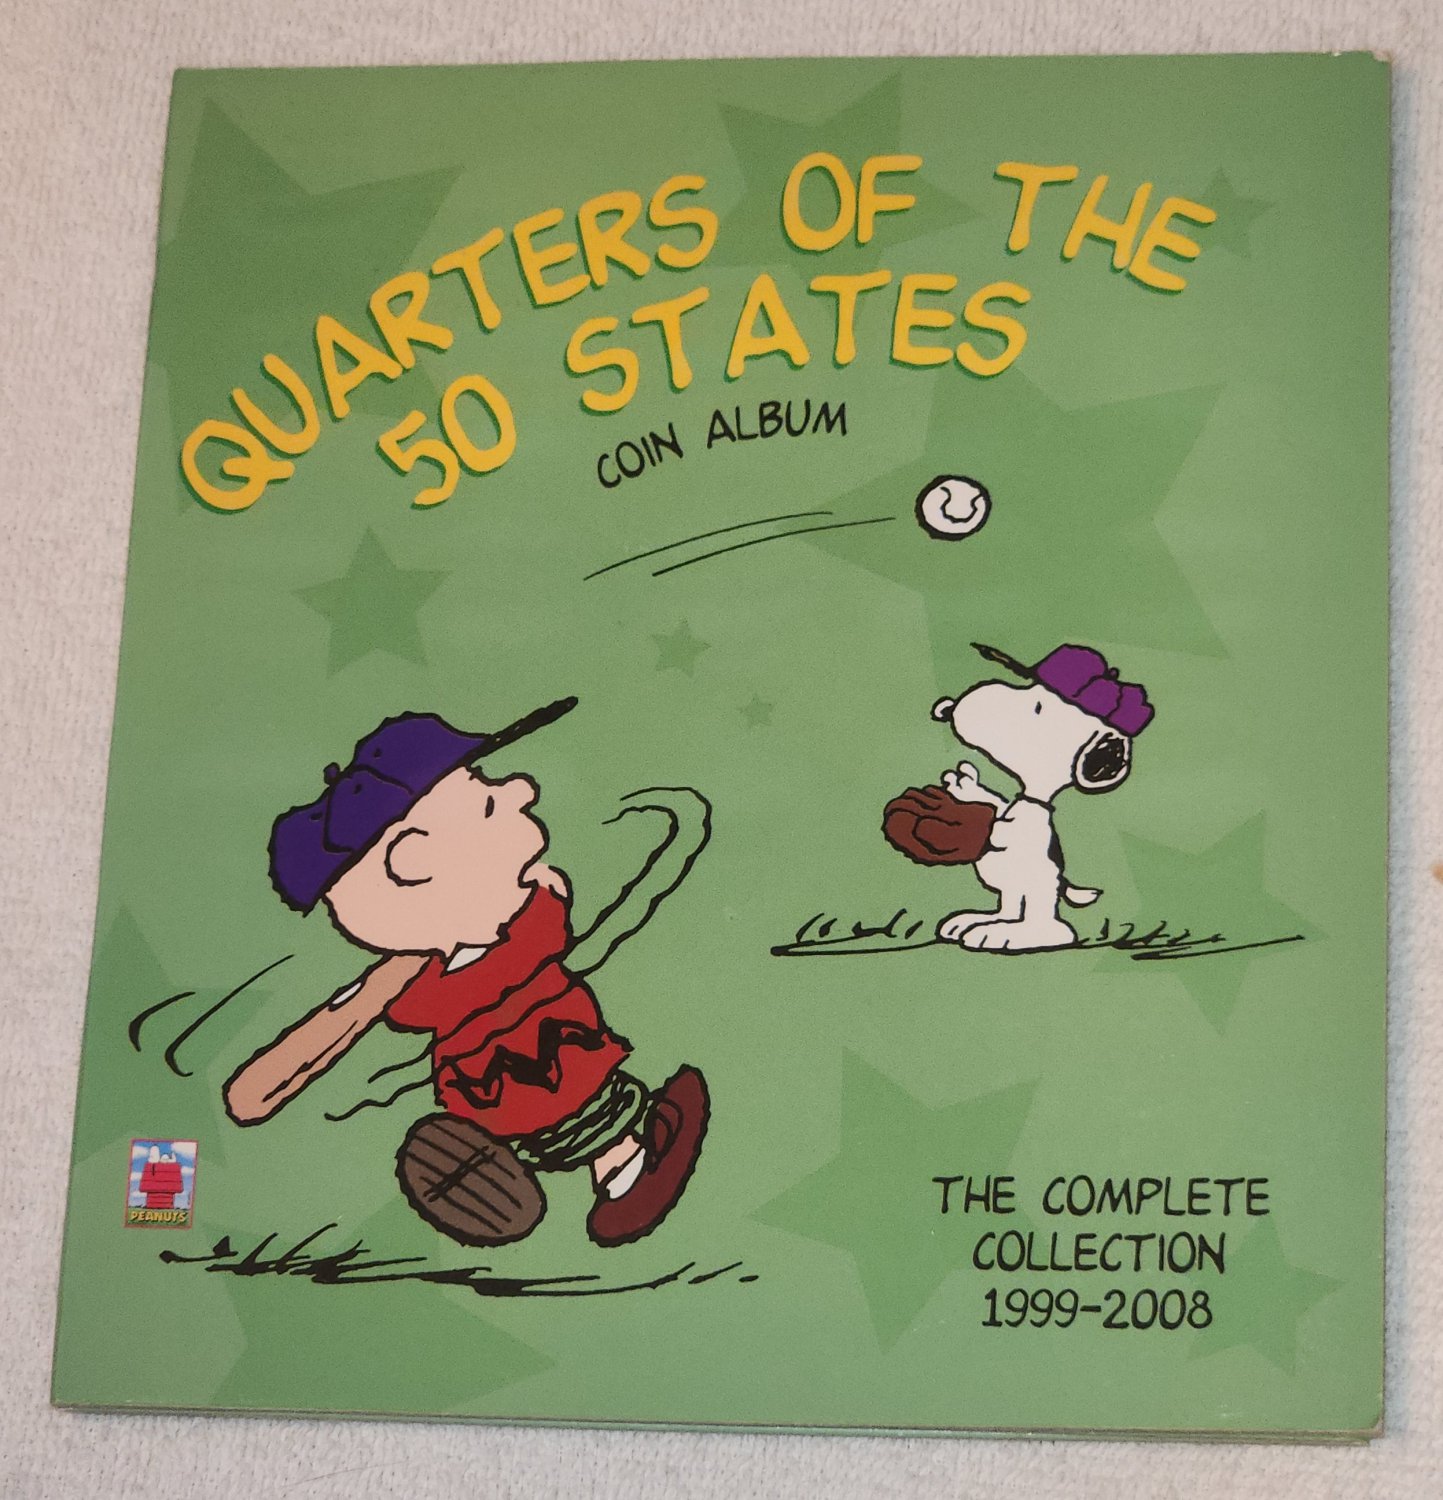 Peanuts Gang Quarters of the 50 States Coin Album + Sacagawea Golden Dollar Charlie Brown Snoopy